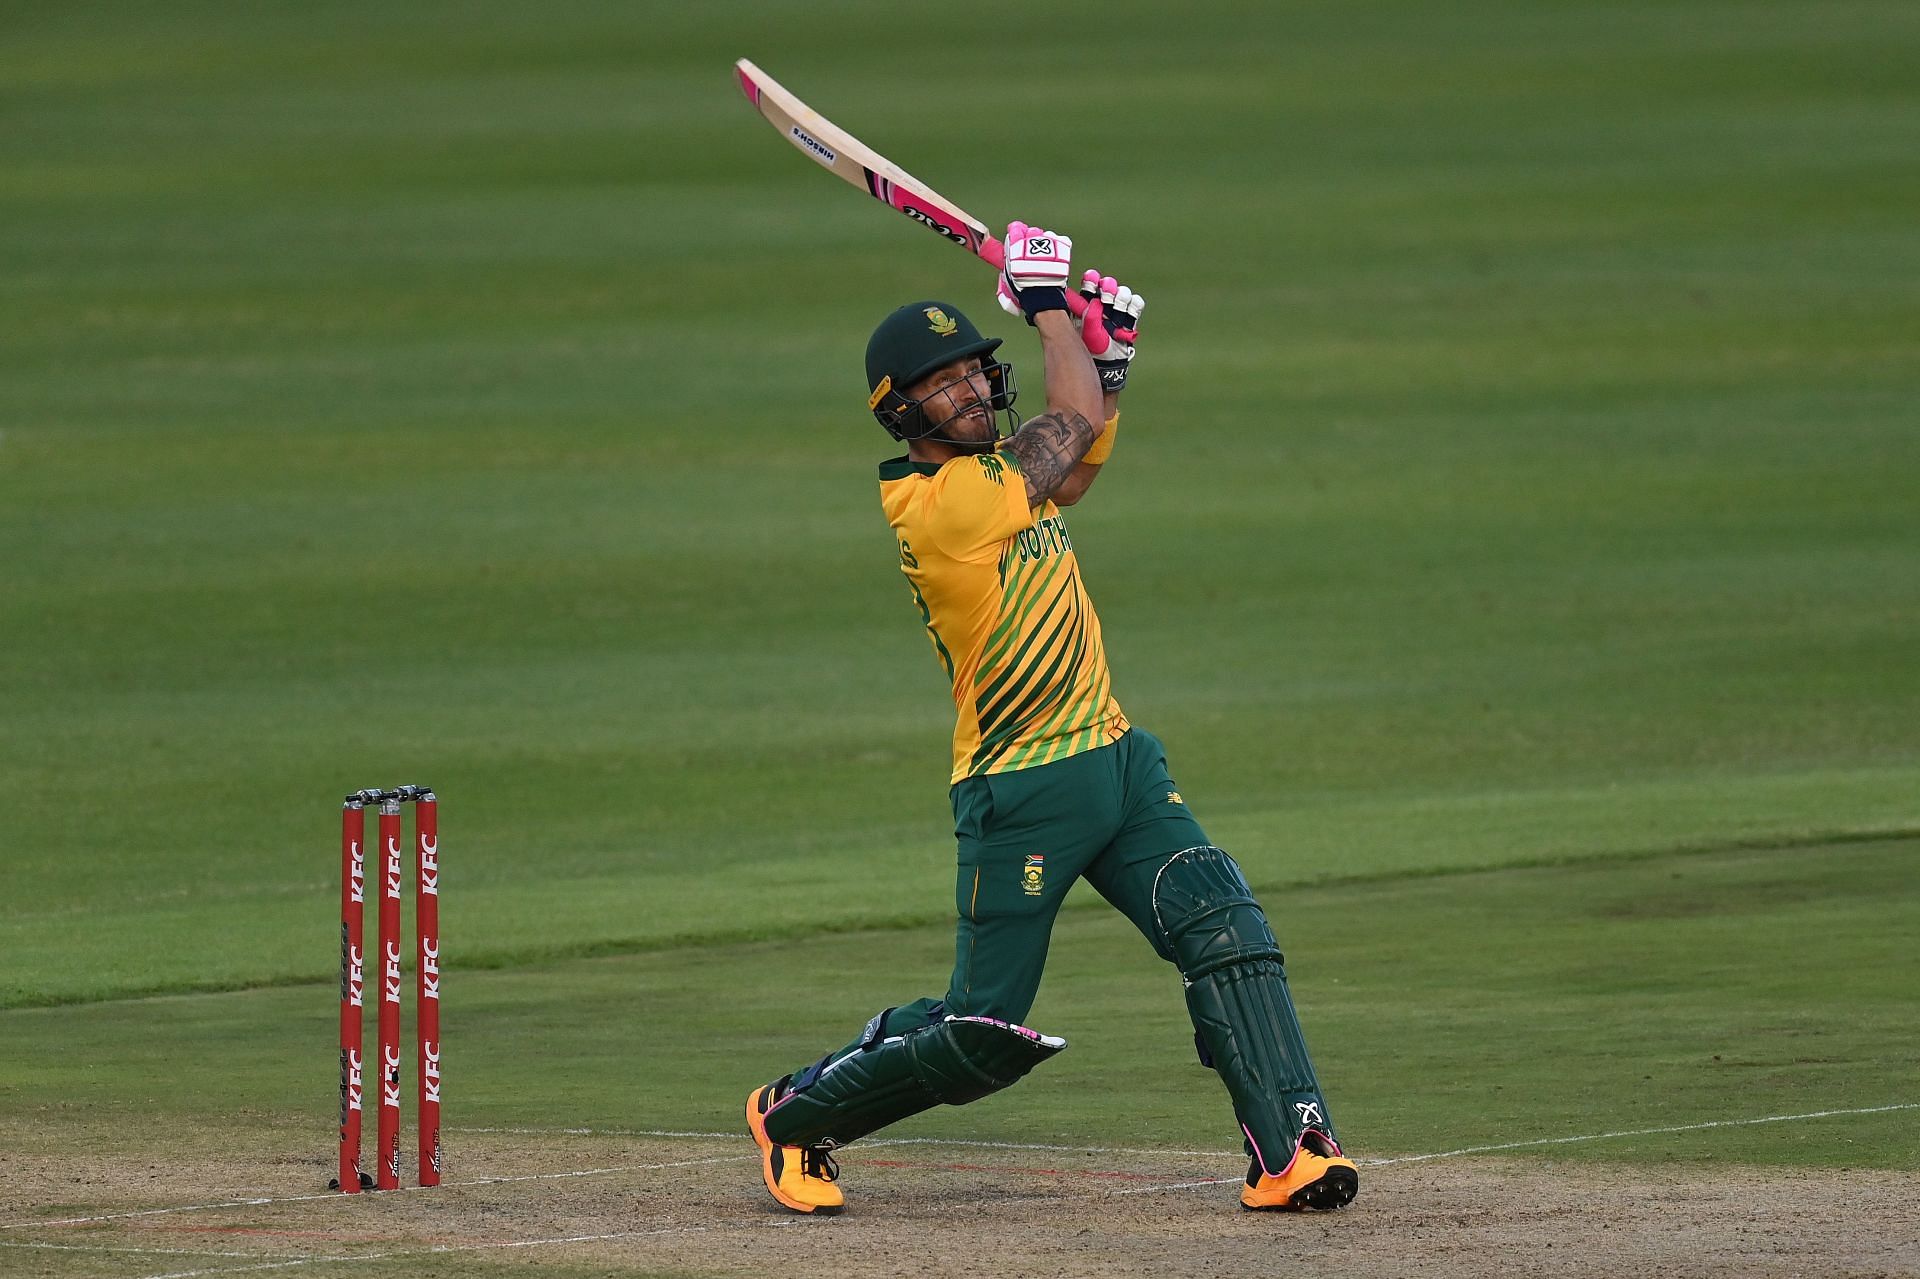 Faf du Plessis is an excellent opener in world cricket. (Pic credits: Getty)